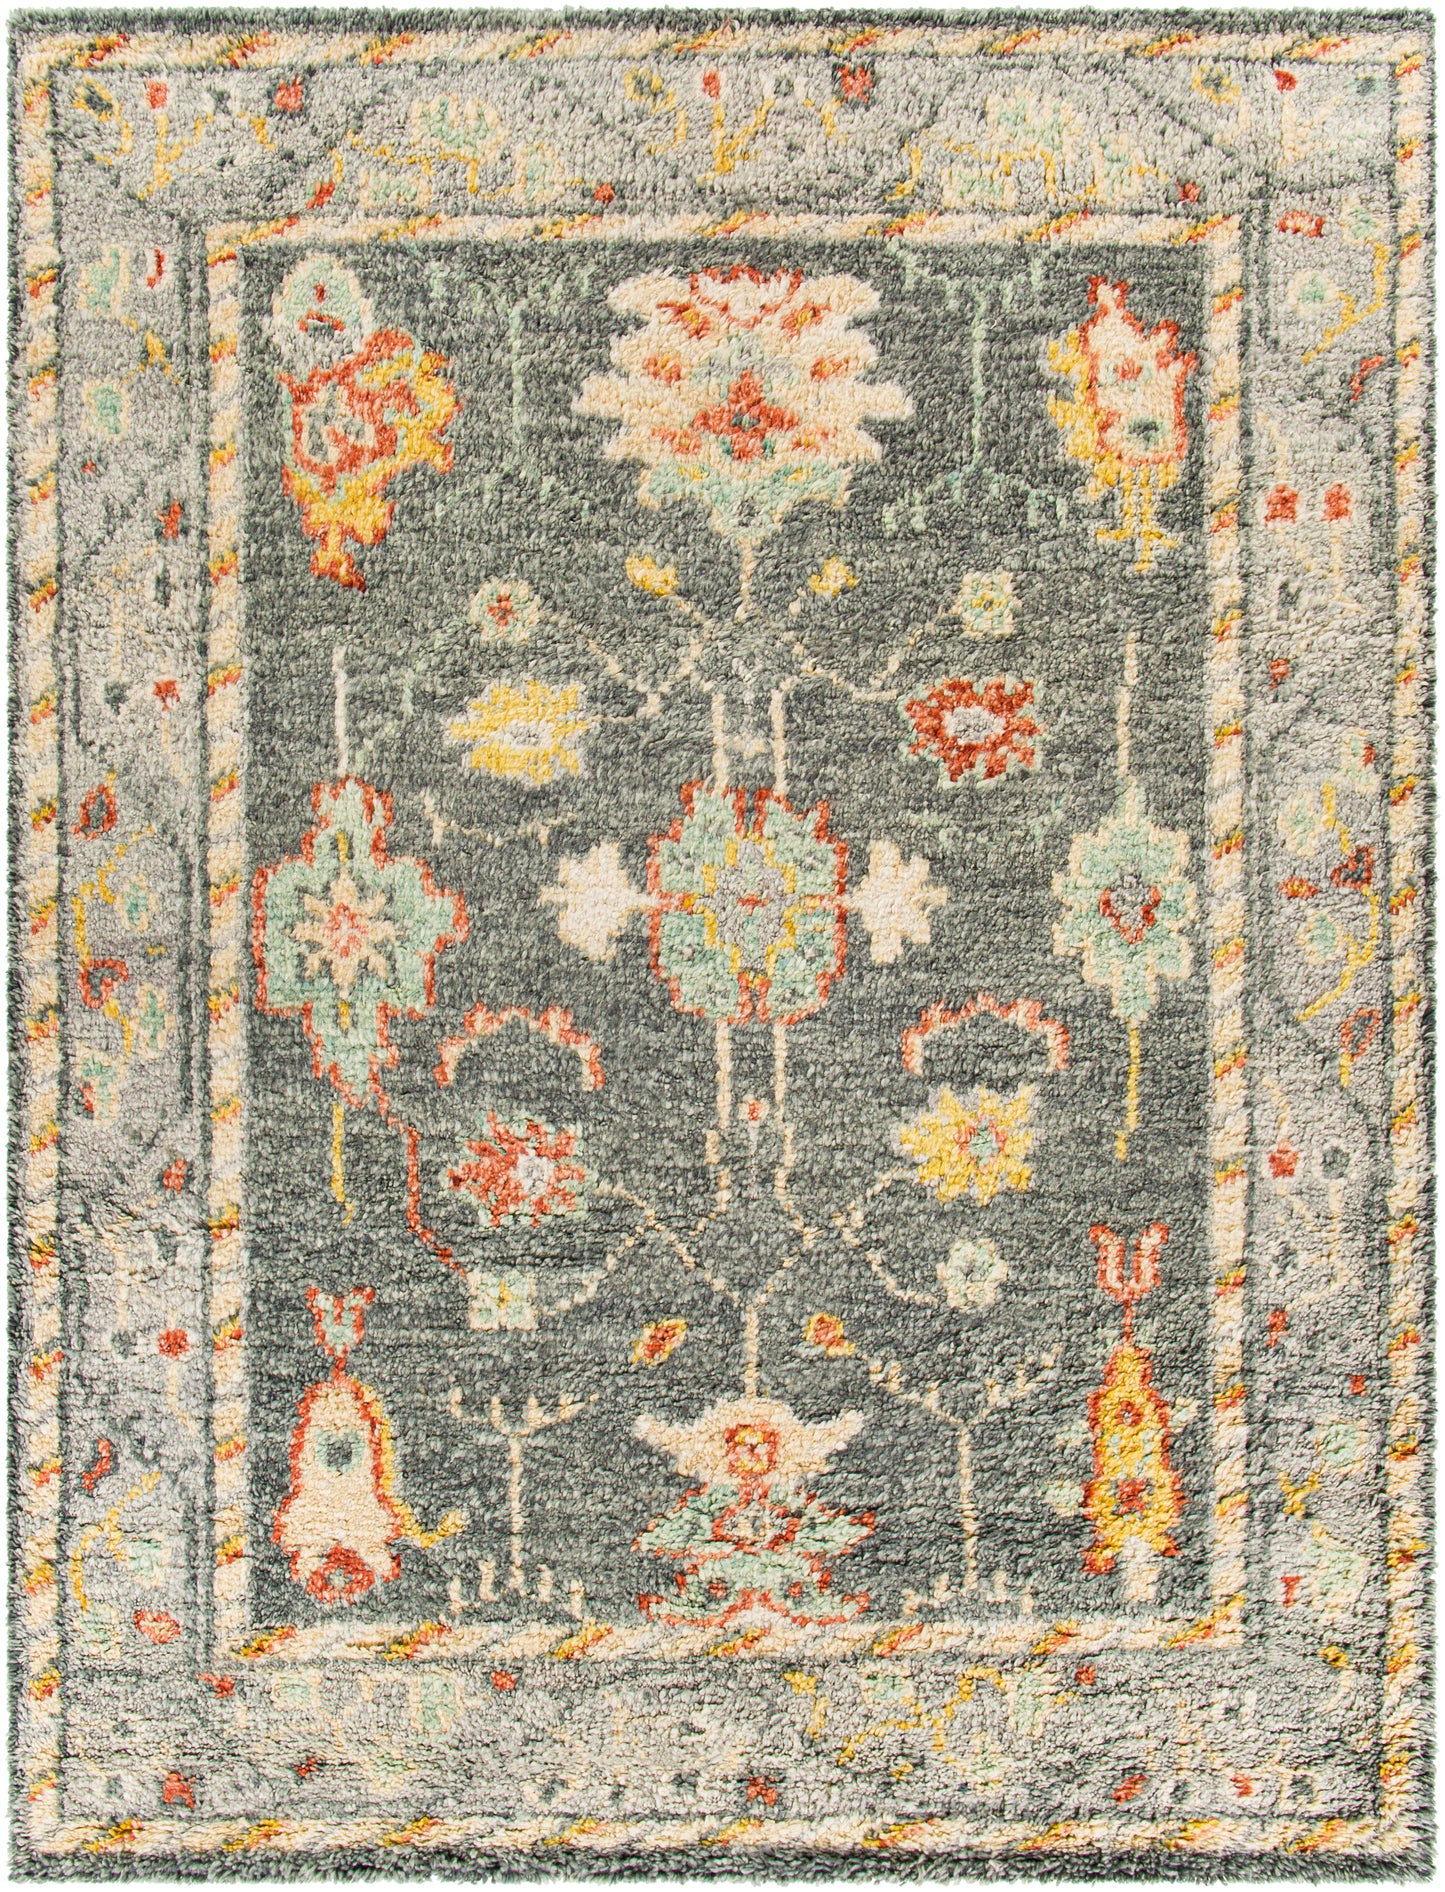 Marrakech 29603 Hand Knotted Wool Indoor Area Rug by Surya Rugs